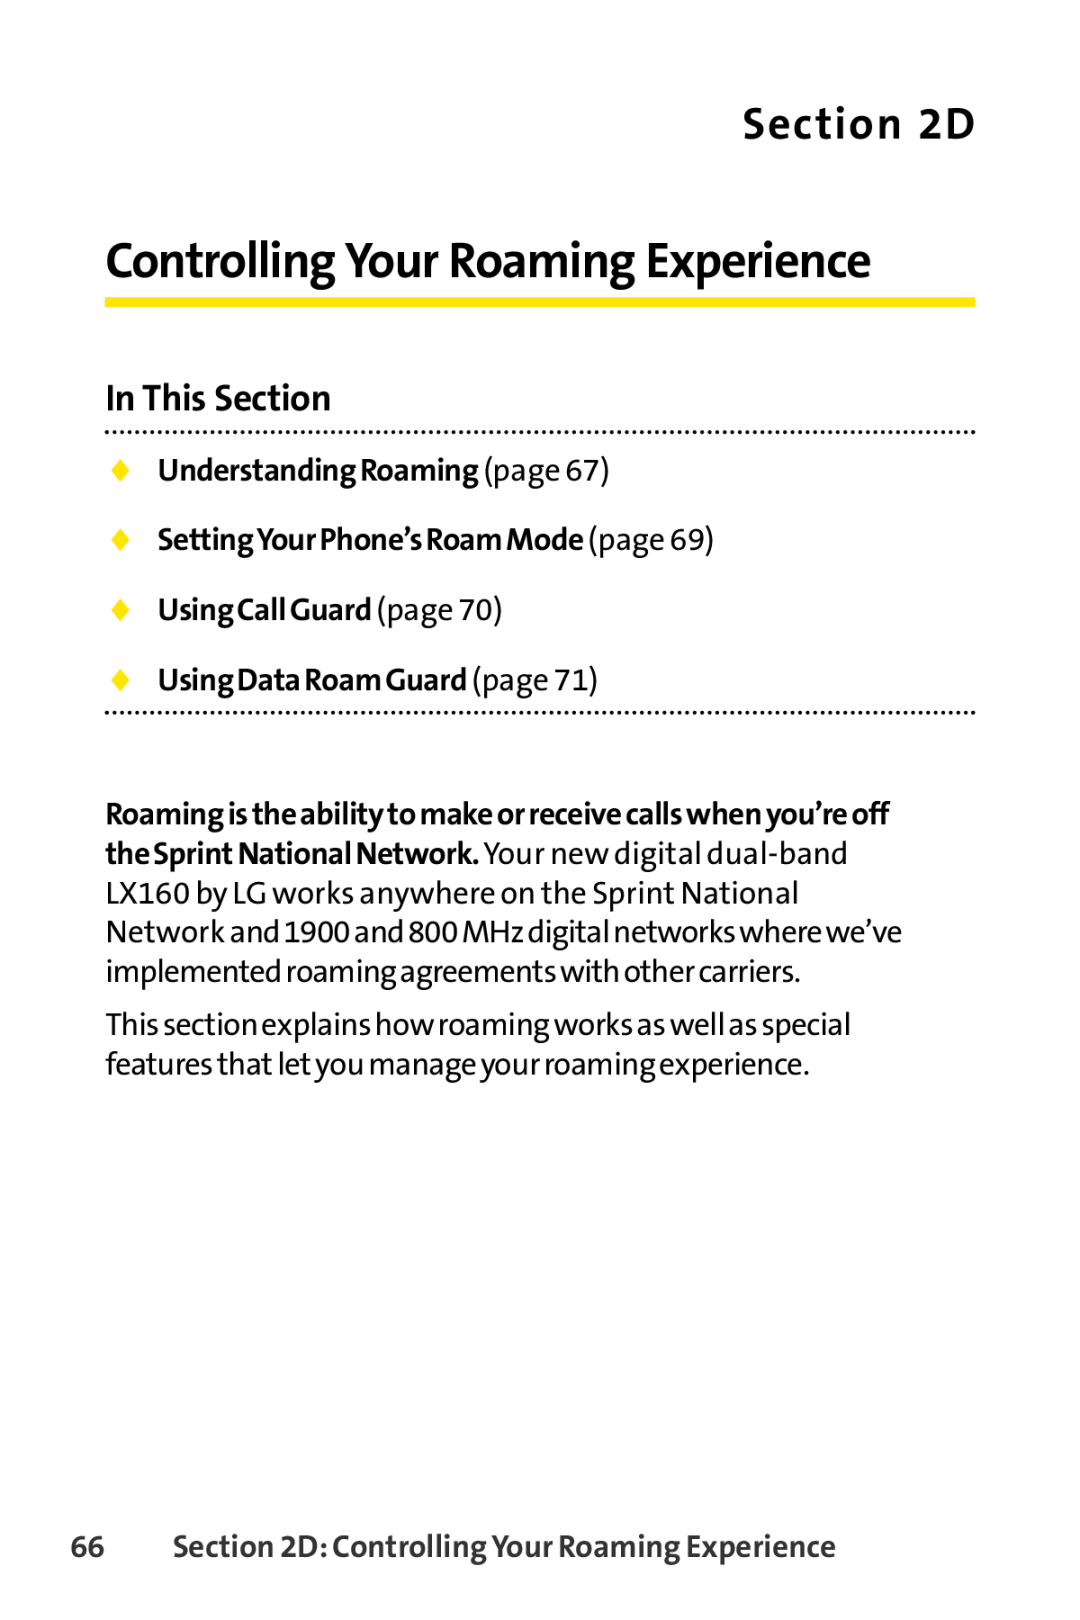 Sprint Nextel LX160 Controlling Your Roaming Experience, D,  UnderstandingRoaming page  SettingYourPhone’sRoamMode page 